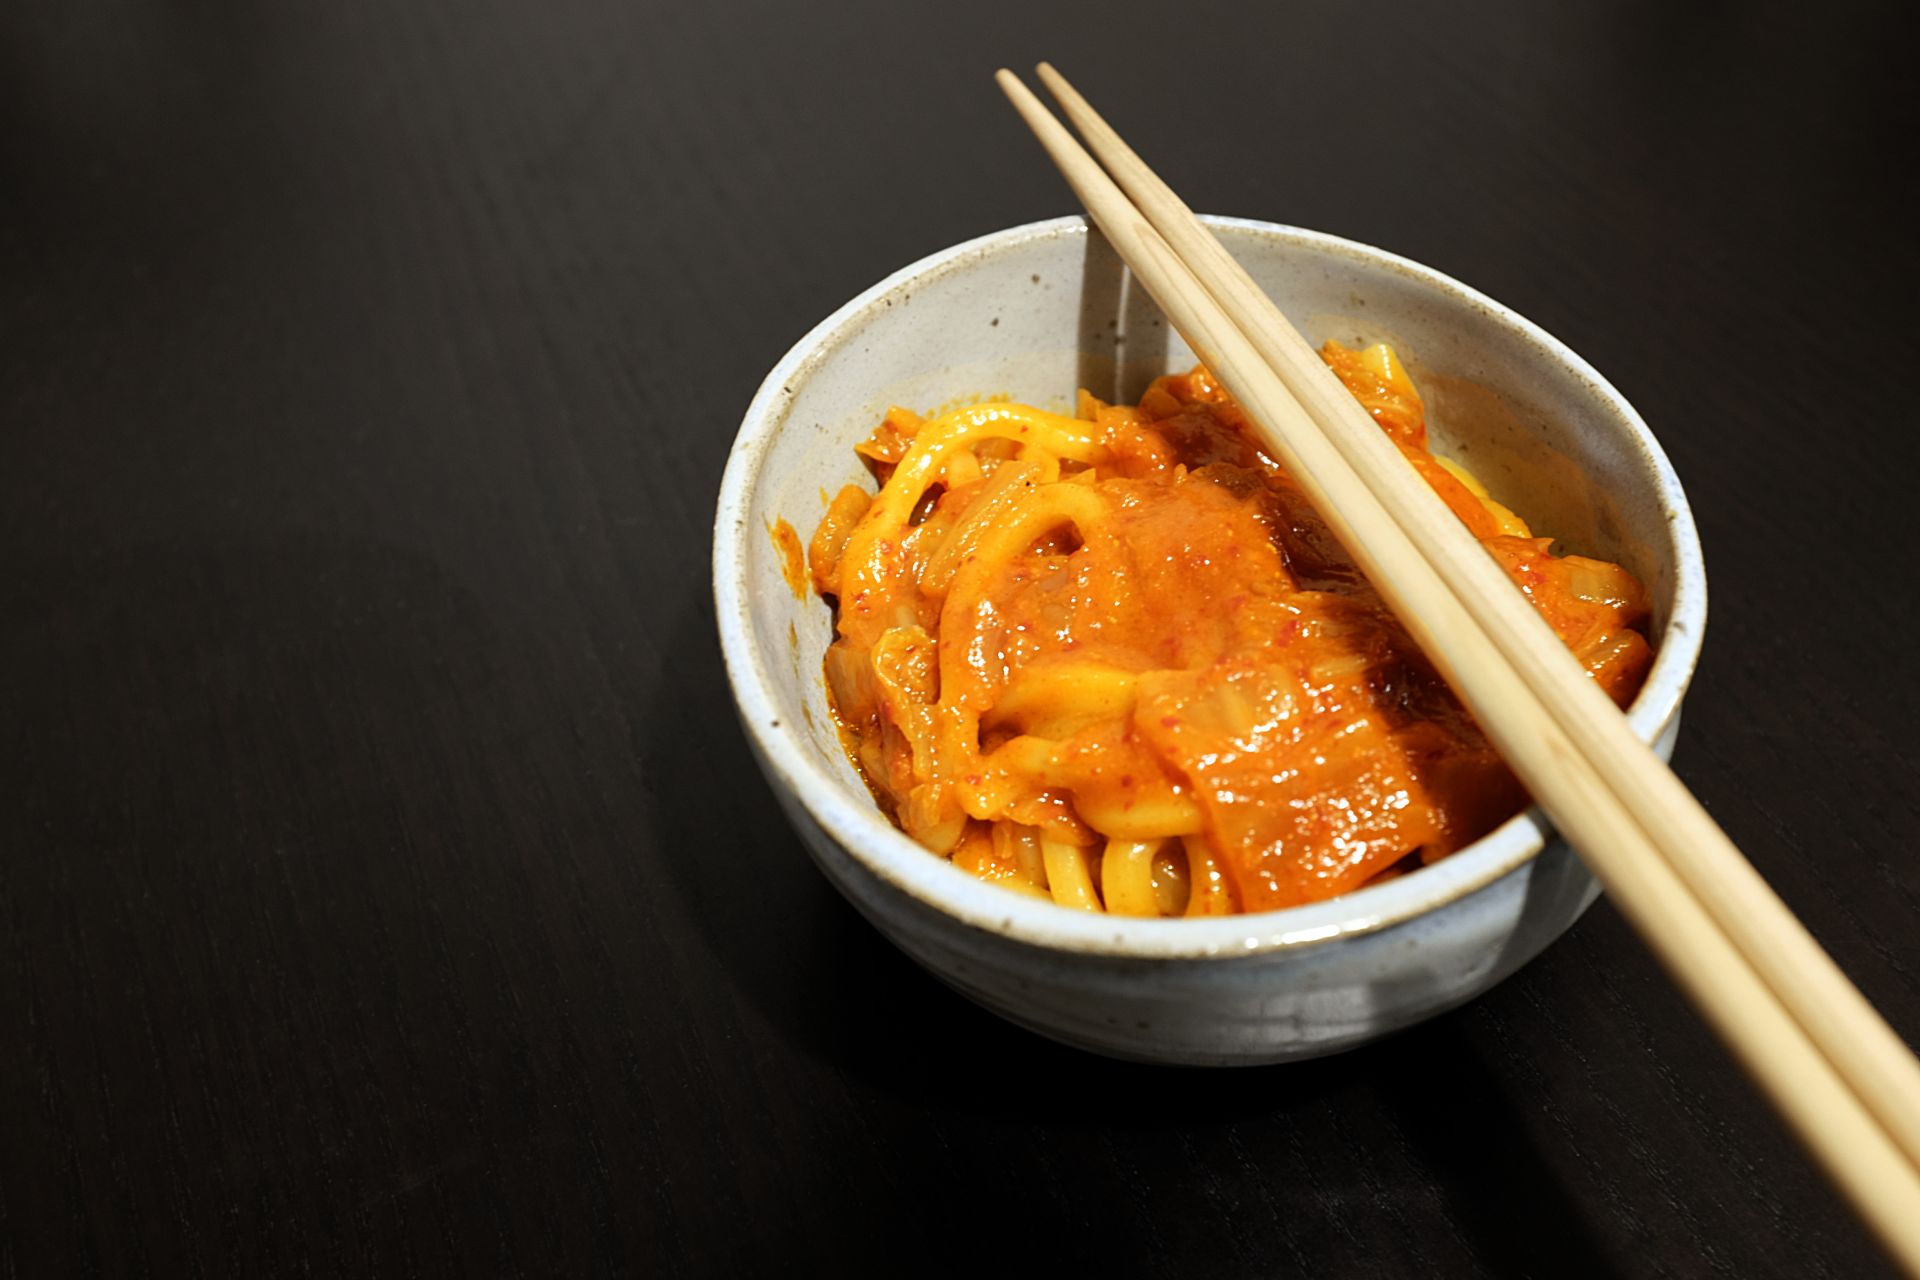 A handmade blue bowl with udon noodles in a reddish sauce. A pair of chopsticks is resting on the bowl